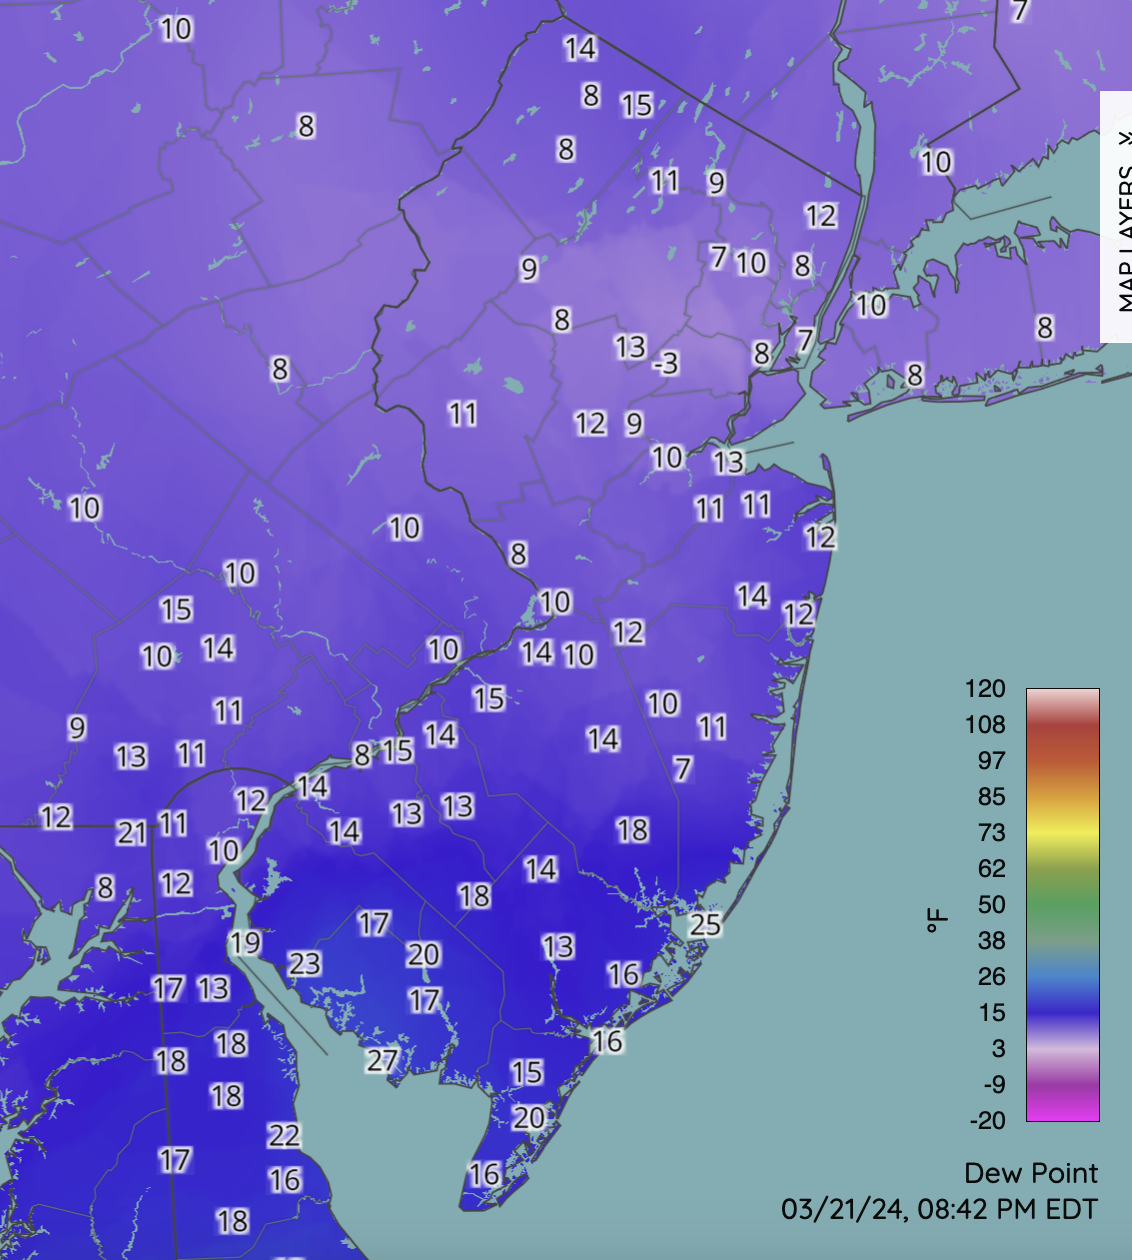 Dew point temperatures at 8:48 PM on March 21st at NJWxNet, NWS, and other professional weather stations.